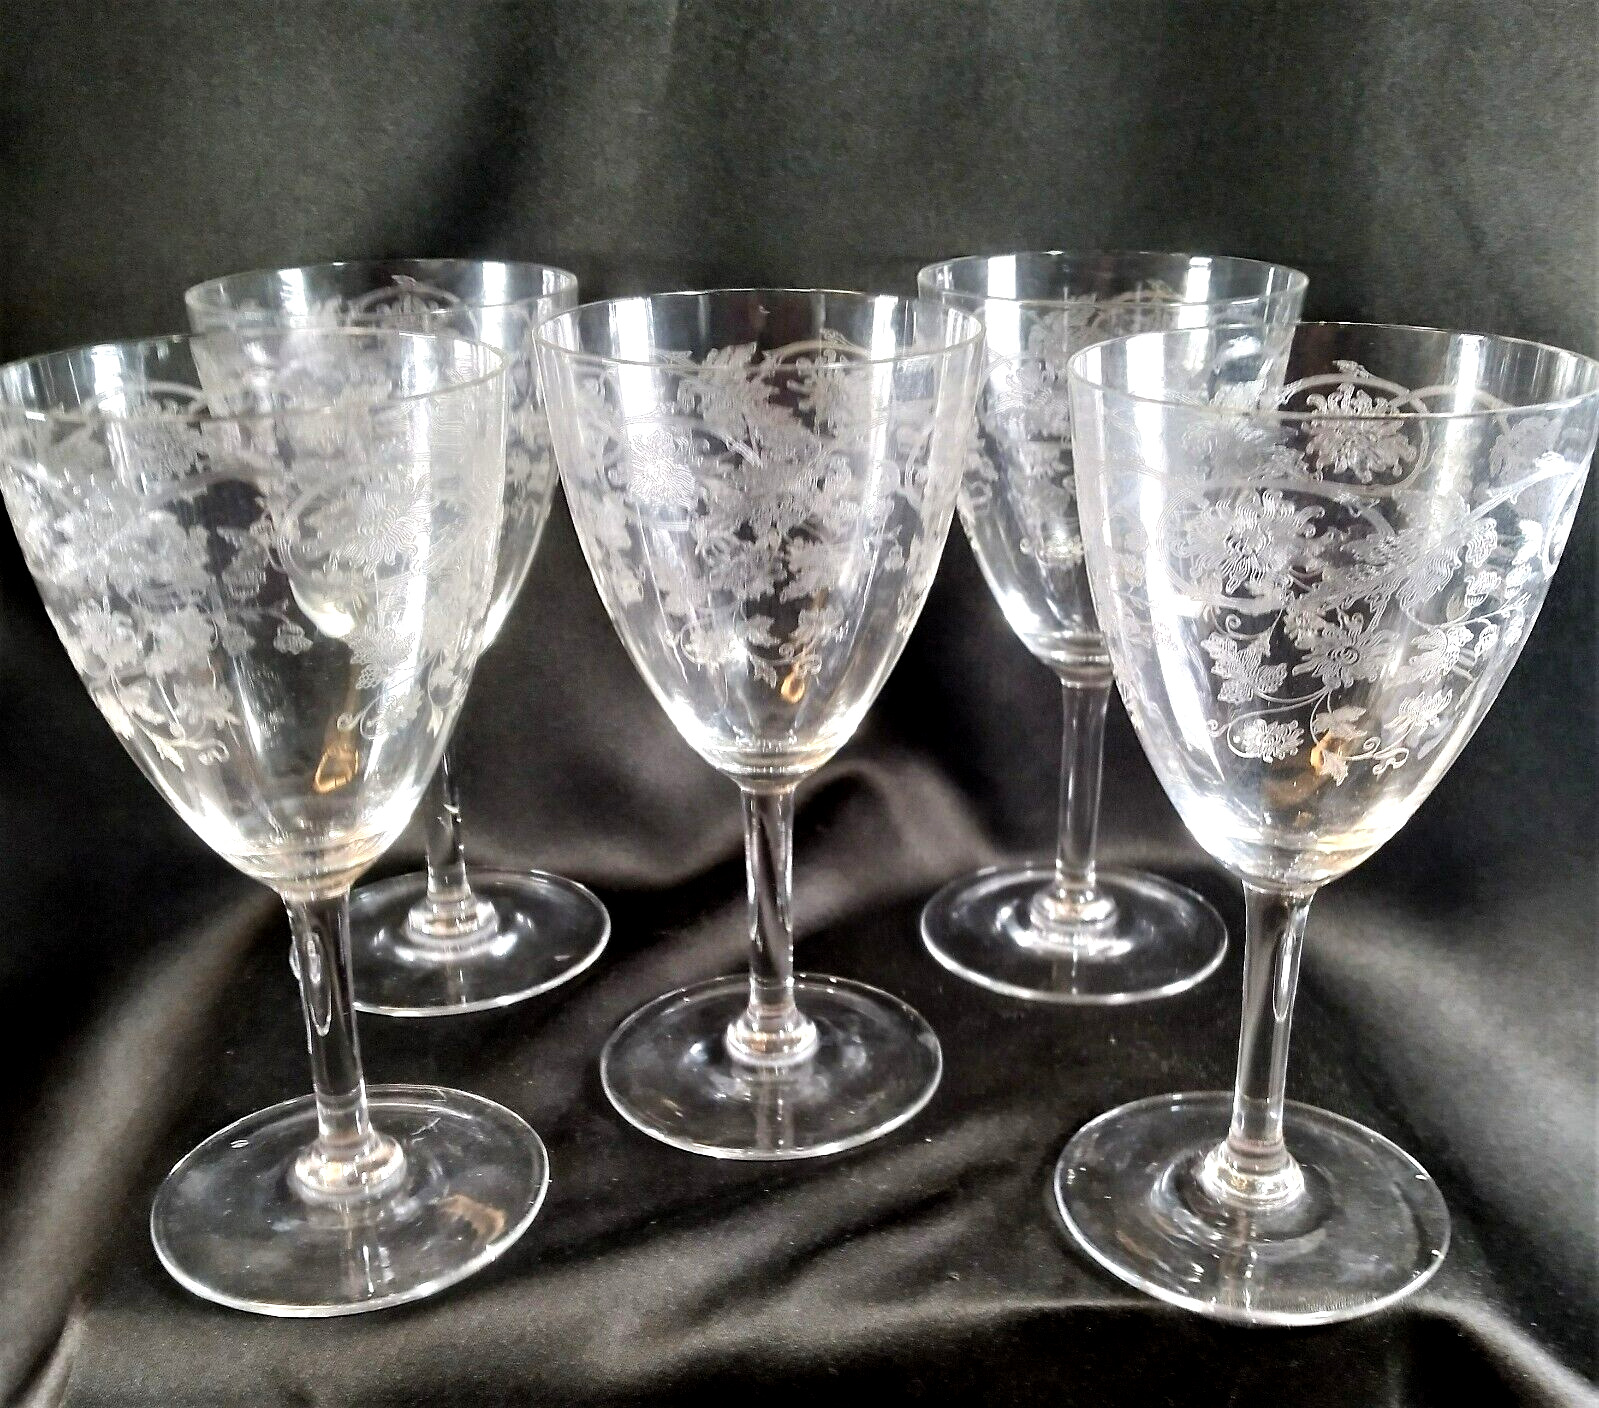 5 Antique Heisey Sabrina Stem Water Glasses Clear Floral Etched Optic Panel Bowl